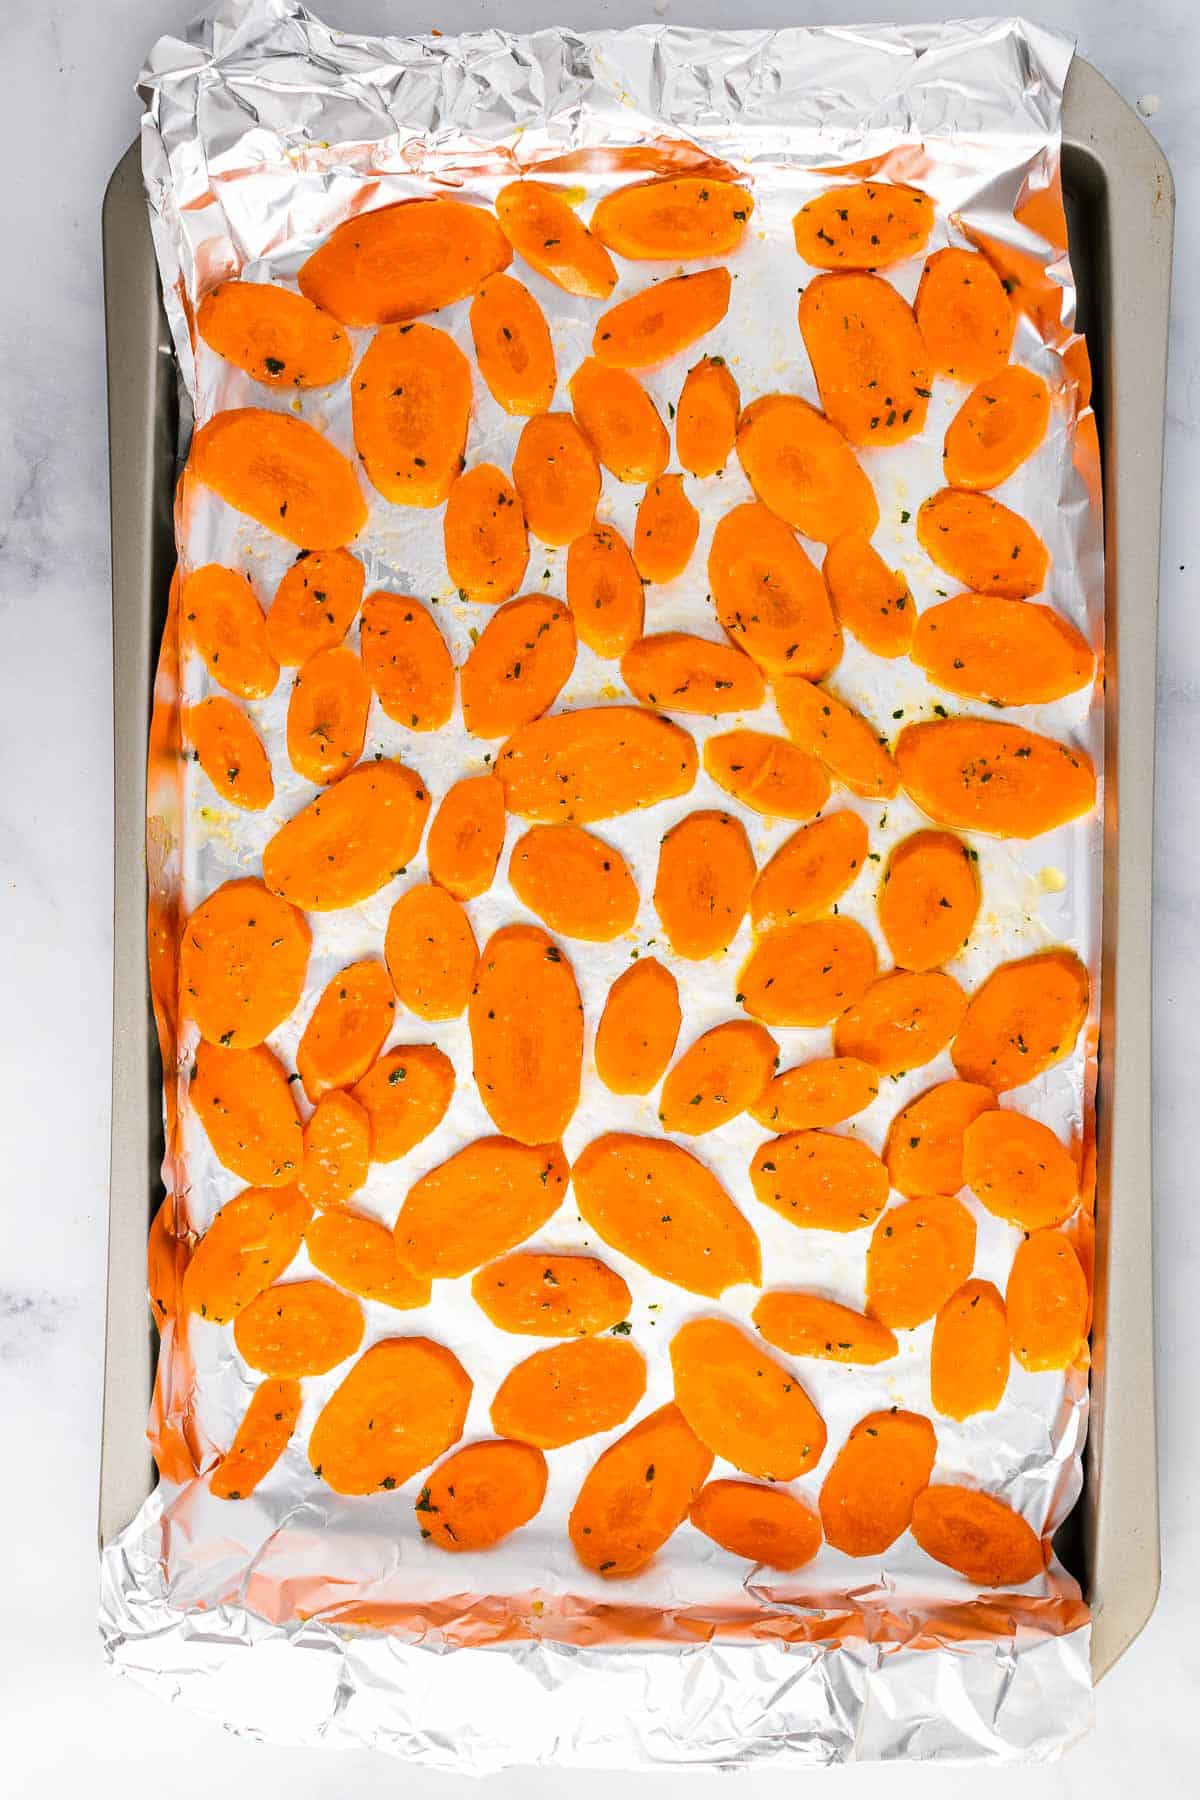 Carrot slices arranged on a baking sheet covered in tin foil, ready to be baked